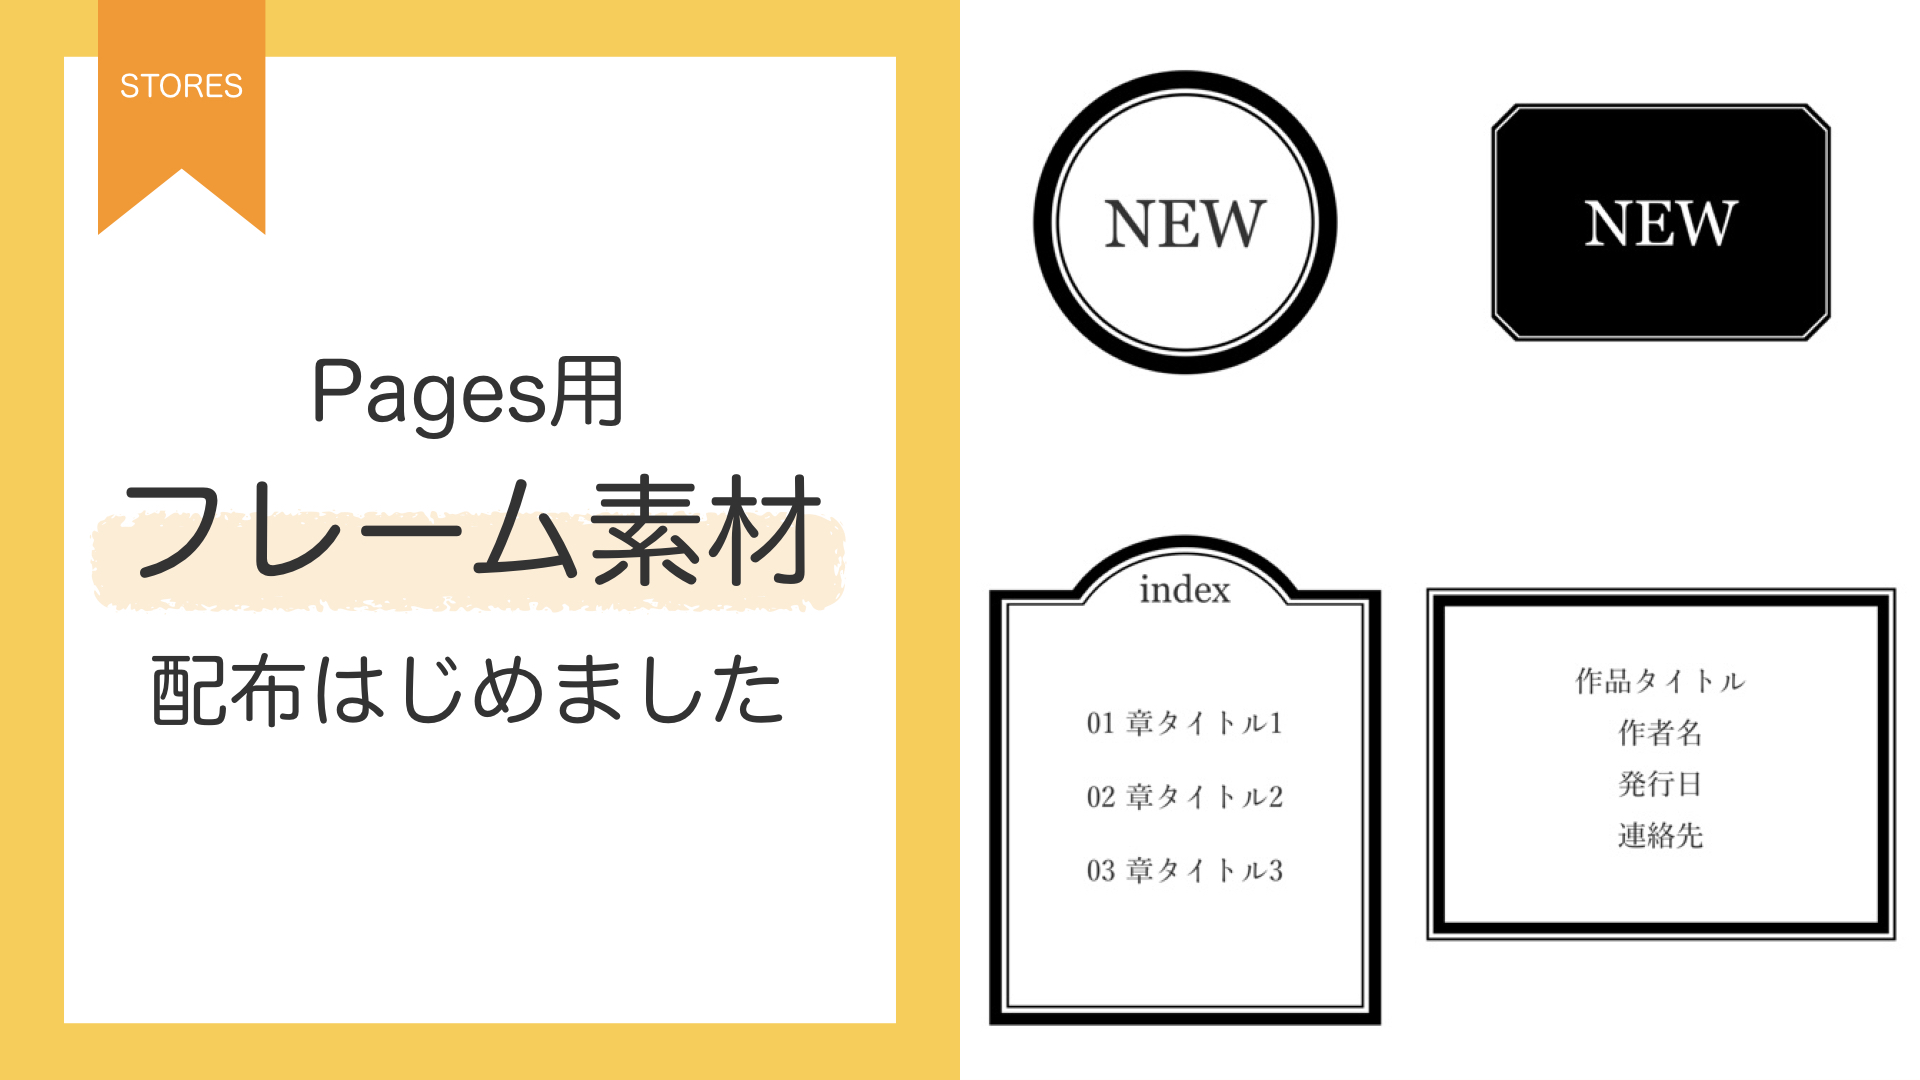 【STORES】Pagesで使えるフレーム（枠）素材62コ｜配布開始